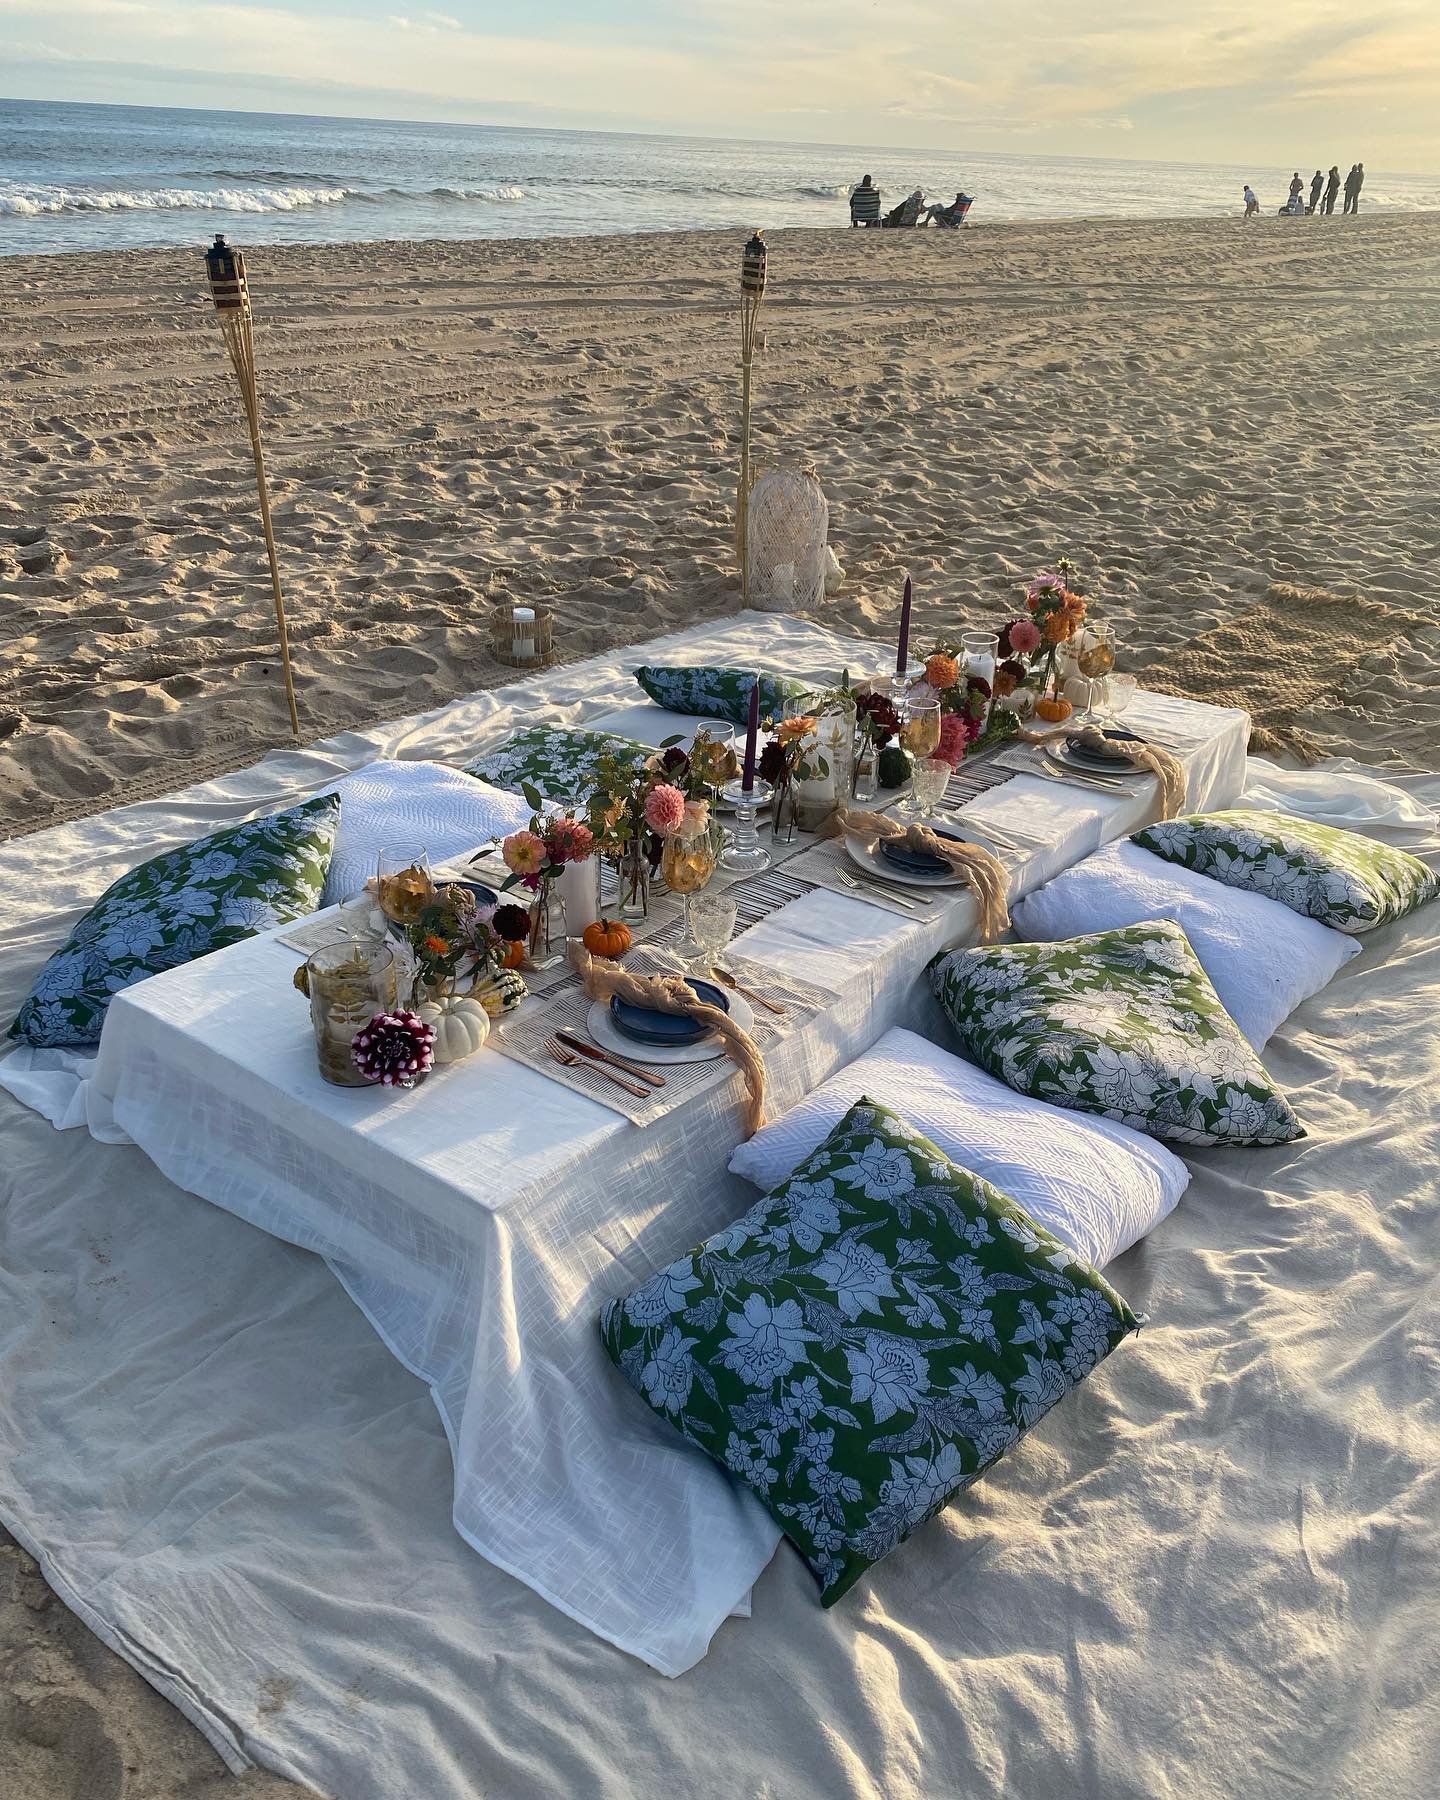 Fall dinner parties on the beach? Why not. Pleasure working with you @destination.haus 🥂
*
*
*
*
#hamptons #beachevent #beachparty #beachcatering #nyccatering #brooklyncatering #goodfoodforgoodpeople #goodlife #fallevent #beachcatering